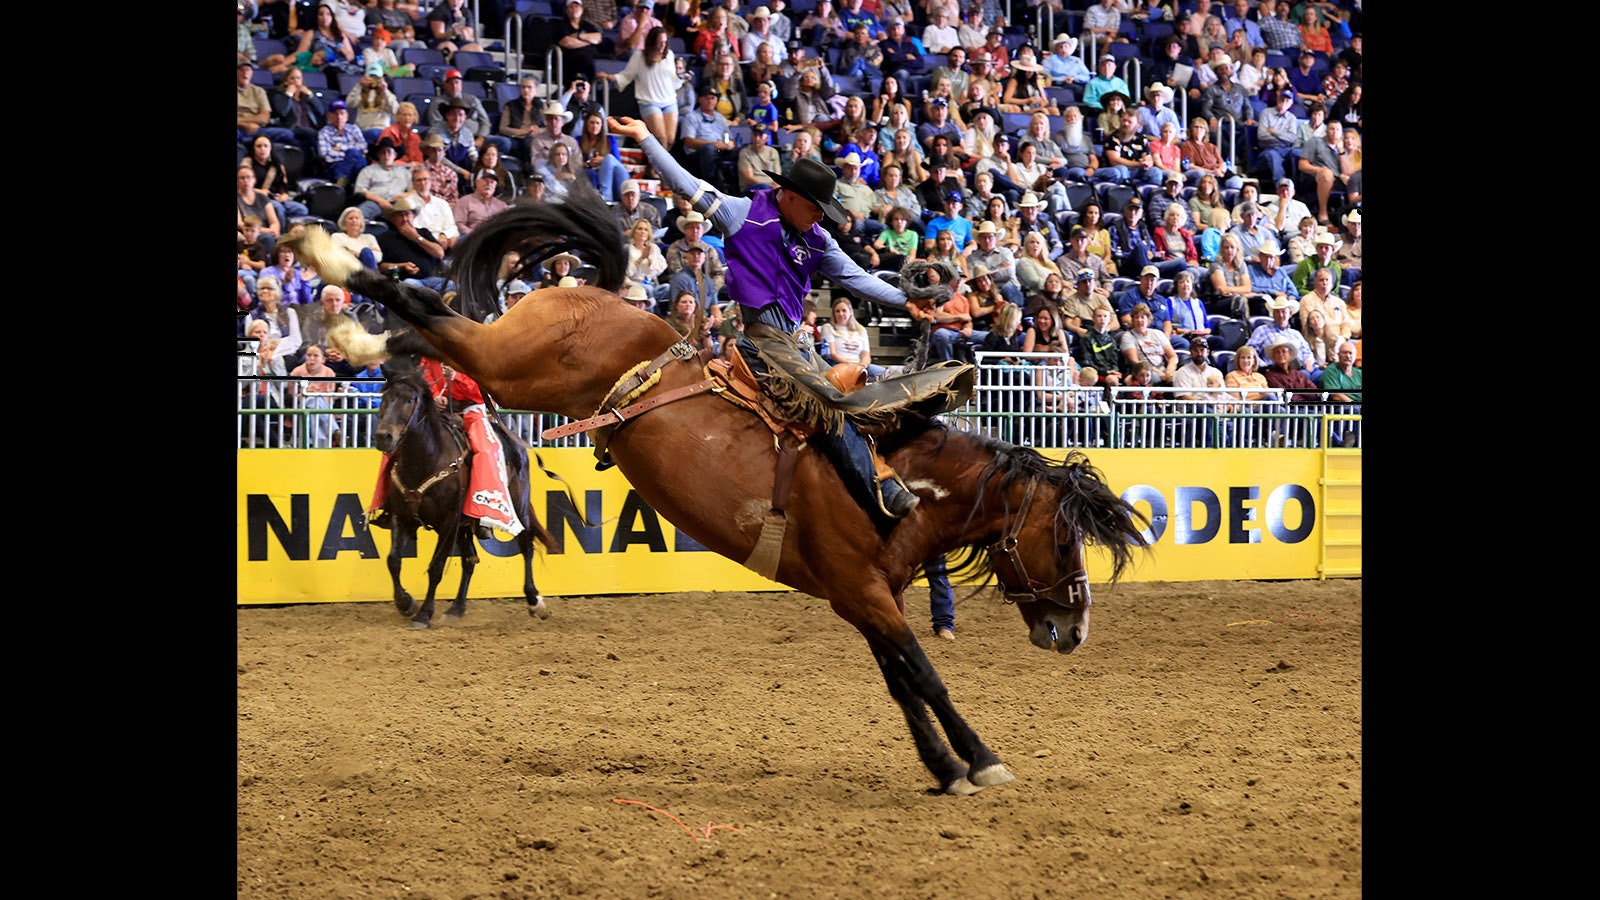 Wyoming native Ira Dickinson competes at the College National Finals Rodeo for Tarleton State University. He's riding Vold Rodeo Co. horse Painted Fling to an 84.5 ride during. The score put him at the top of the saddle bronc competition early in the week.